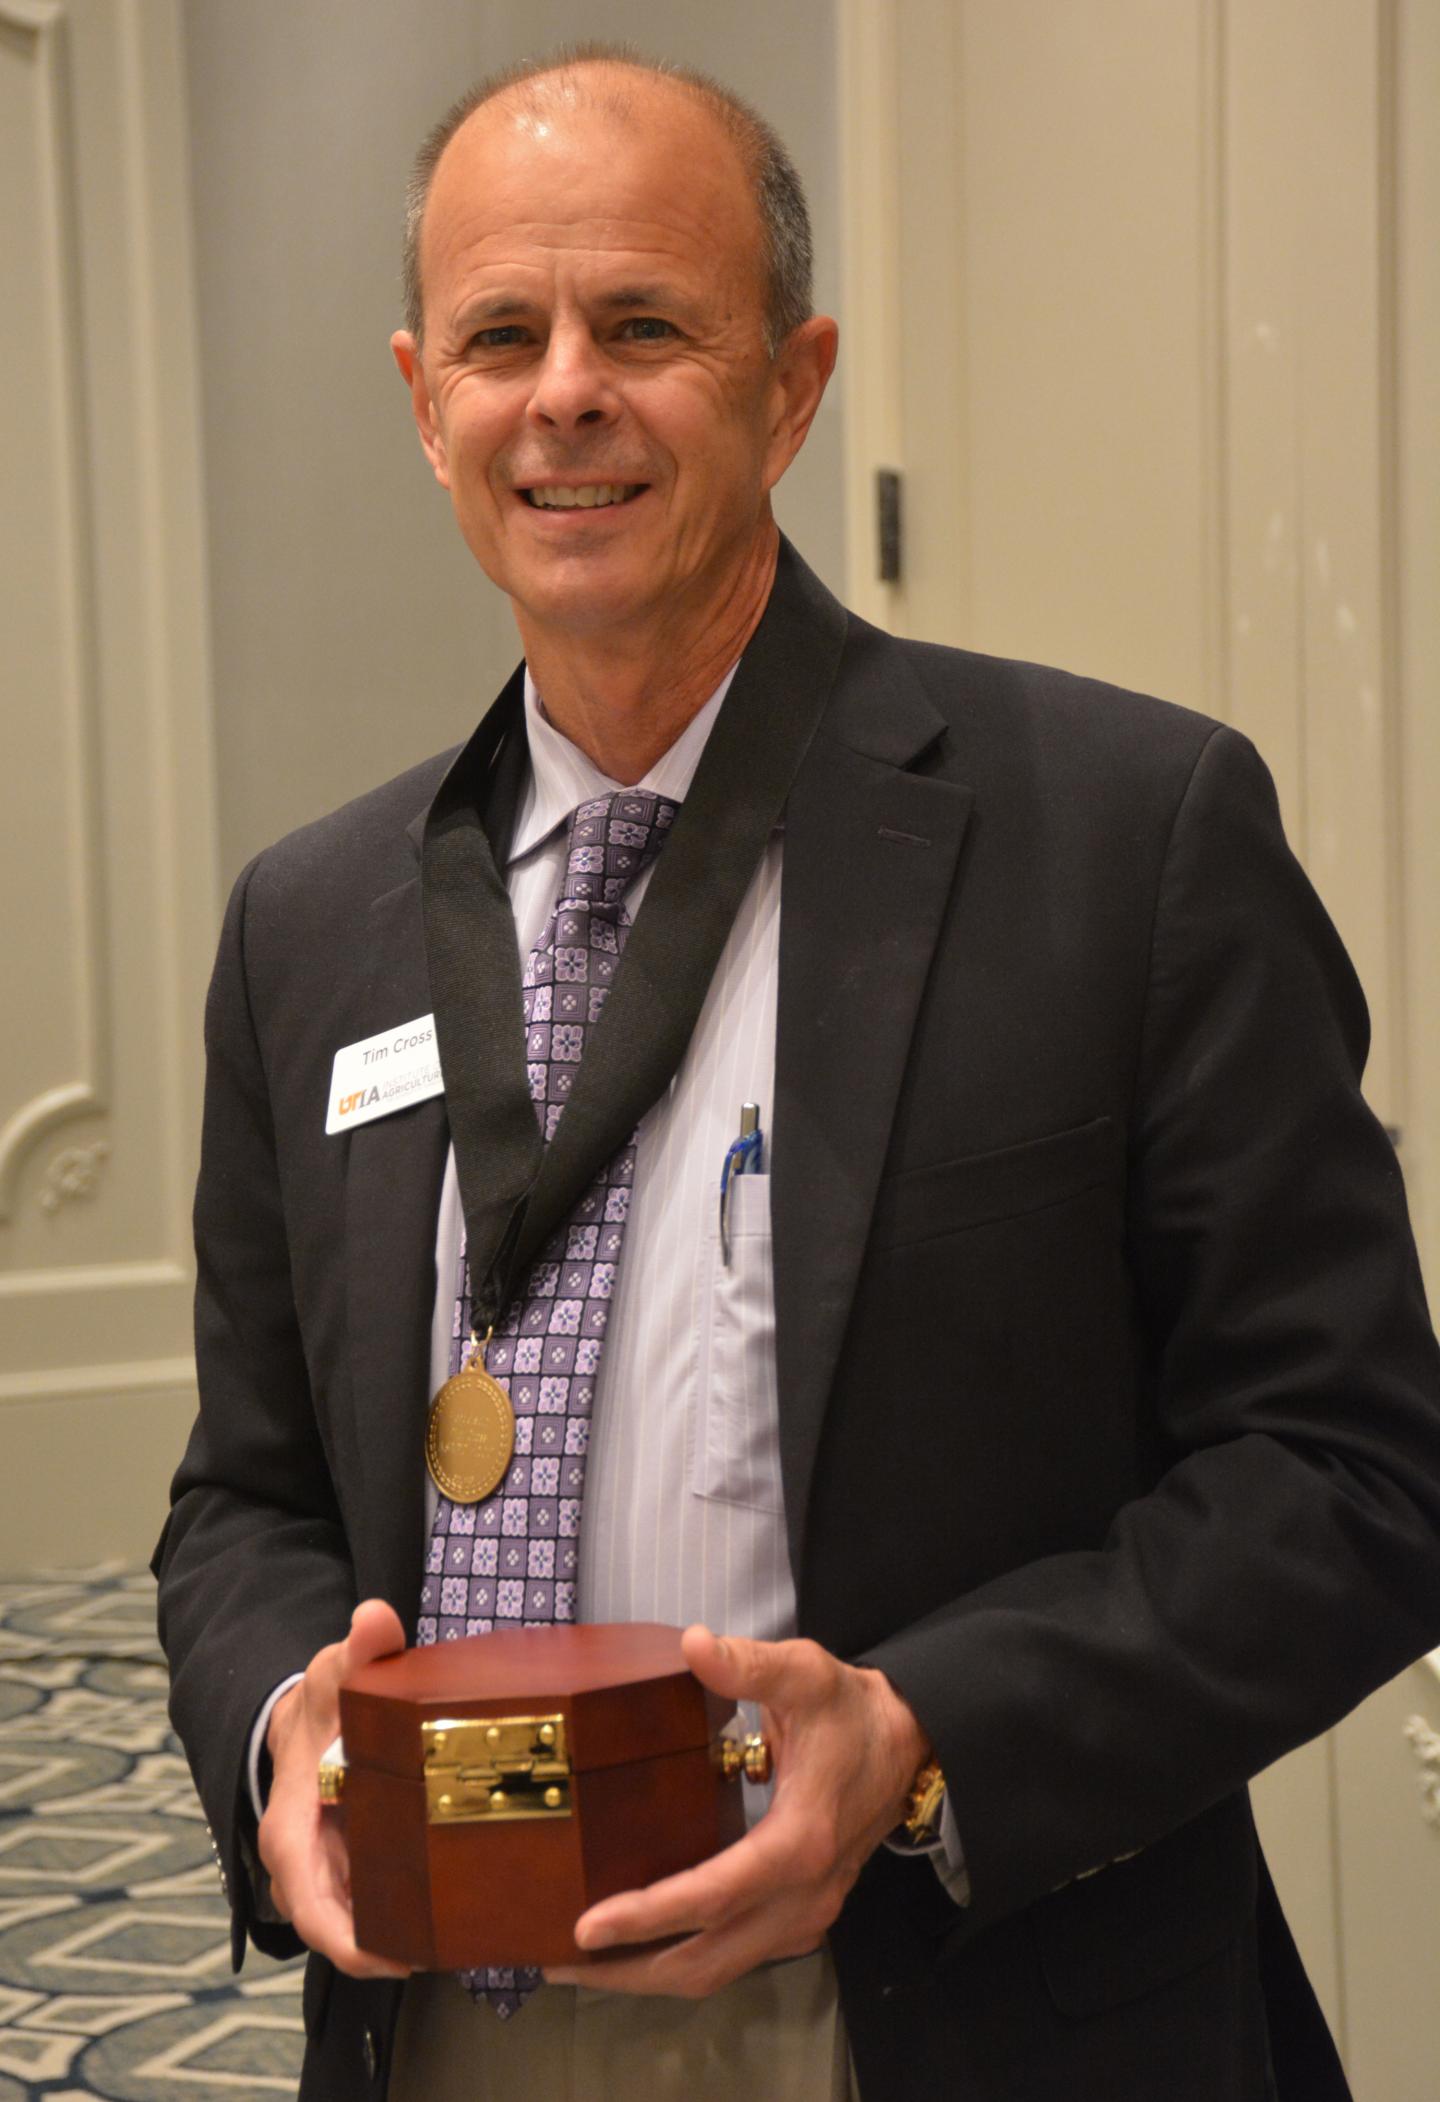 Dr. Tim Cross, Chancellor of the University of Tennessee Institute of Agriculture